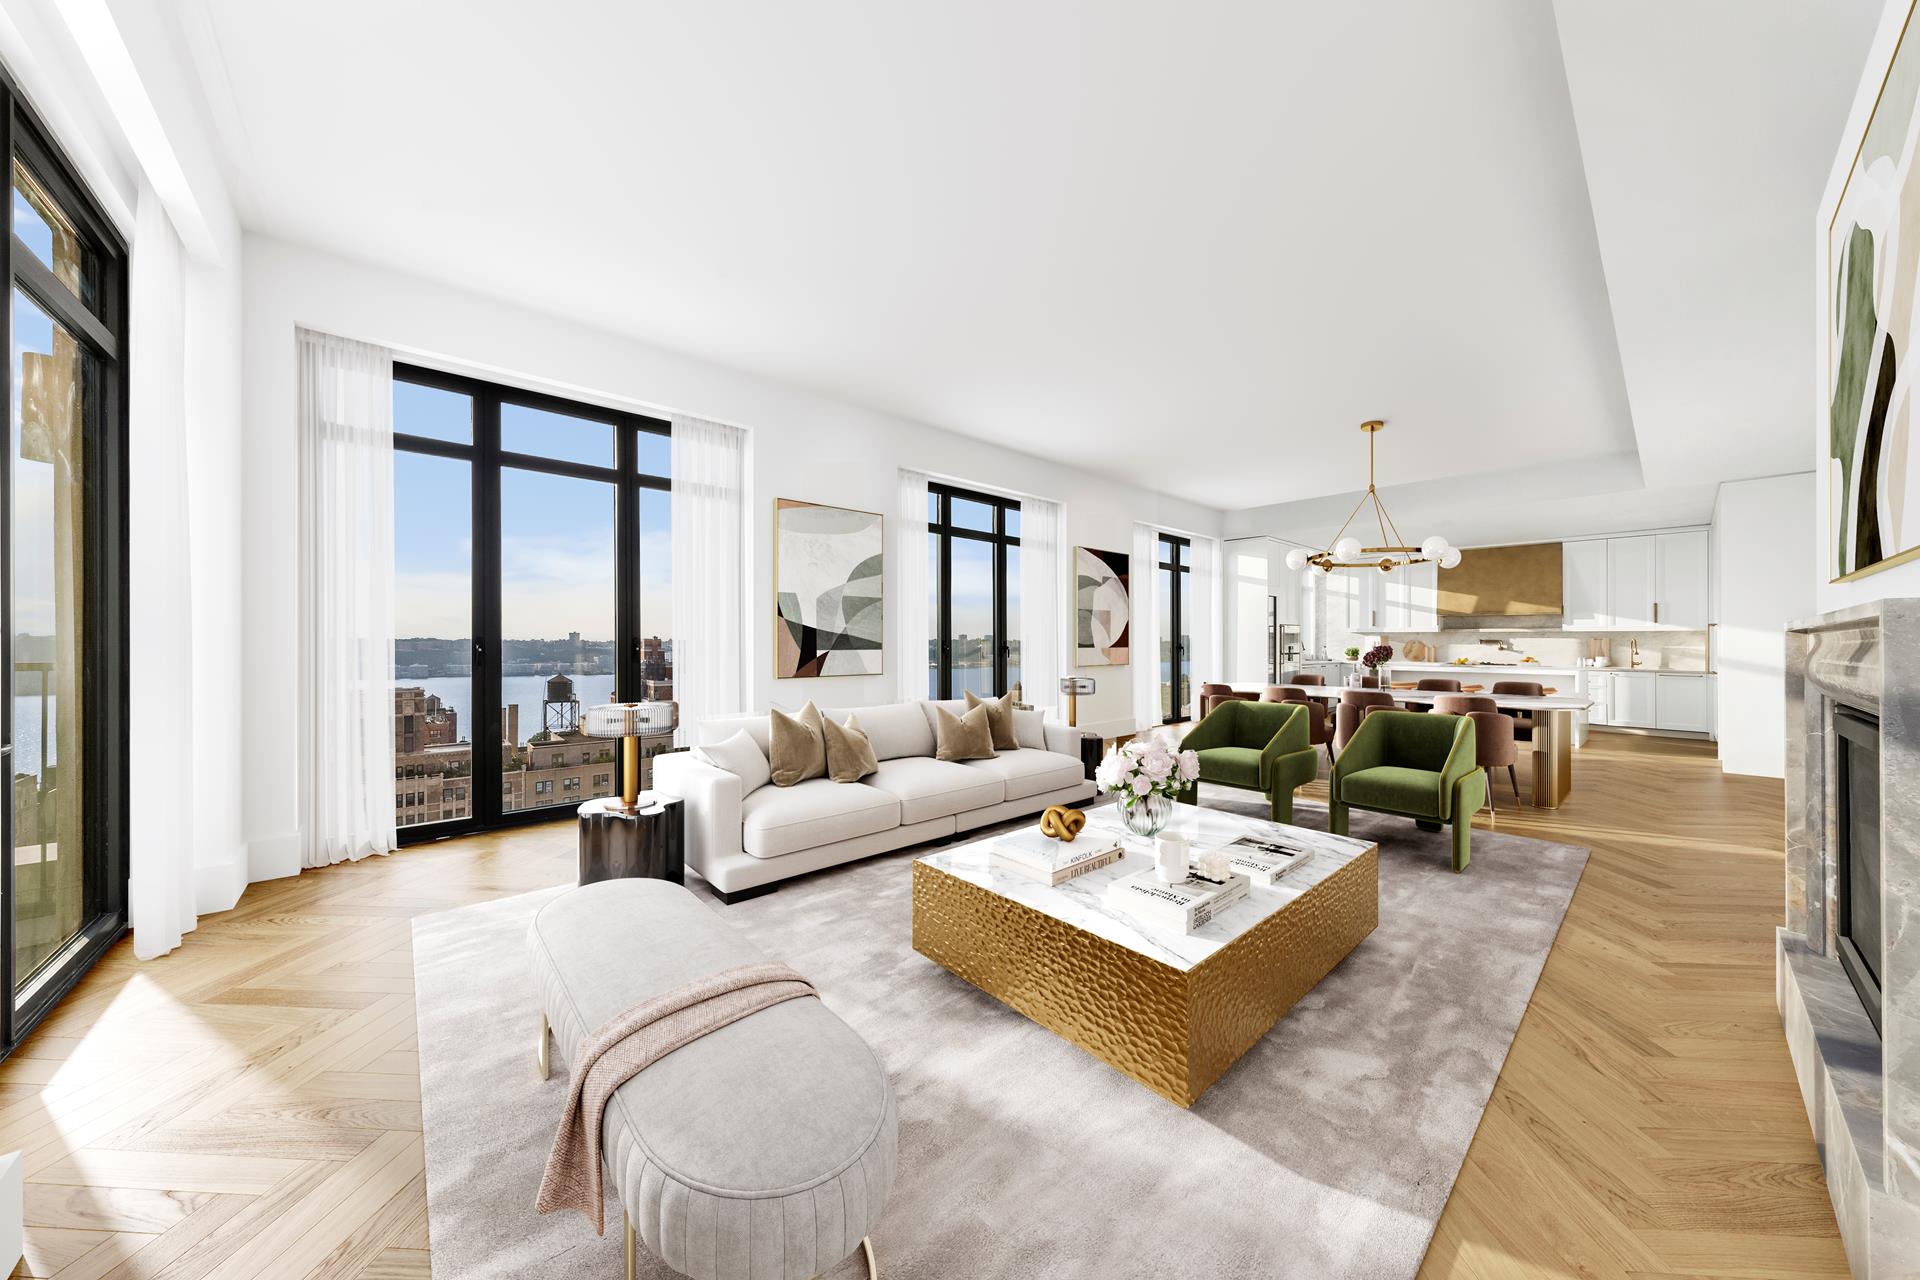 2505 Broadway Penthouse, Upper West Side, Upper West Side, NYC - 4 Bedrooms  
4.5 Bathrooms  
8 Rooms - 